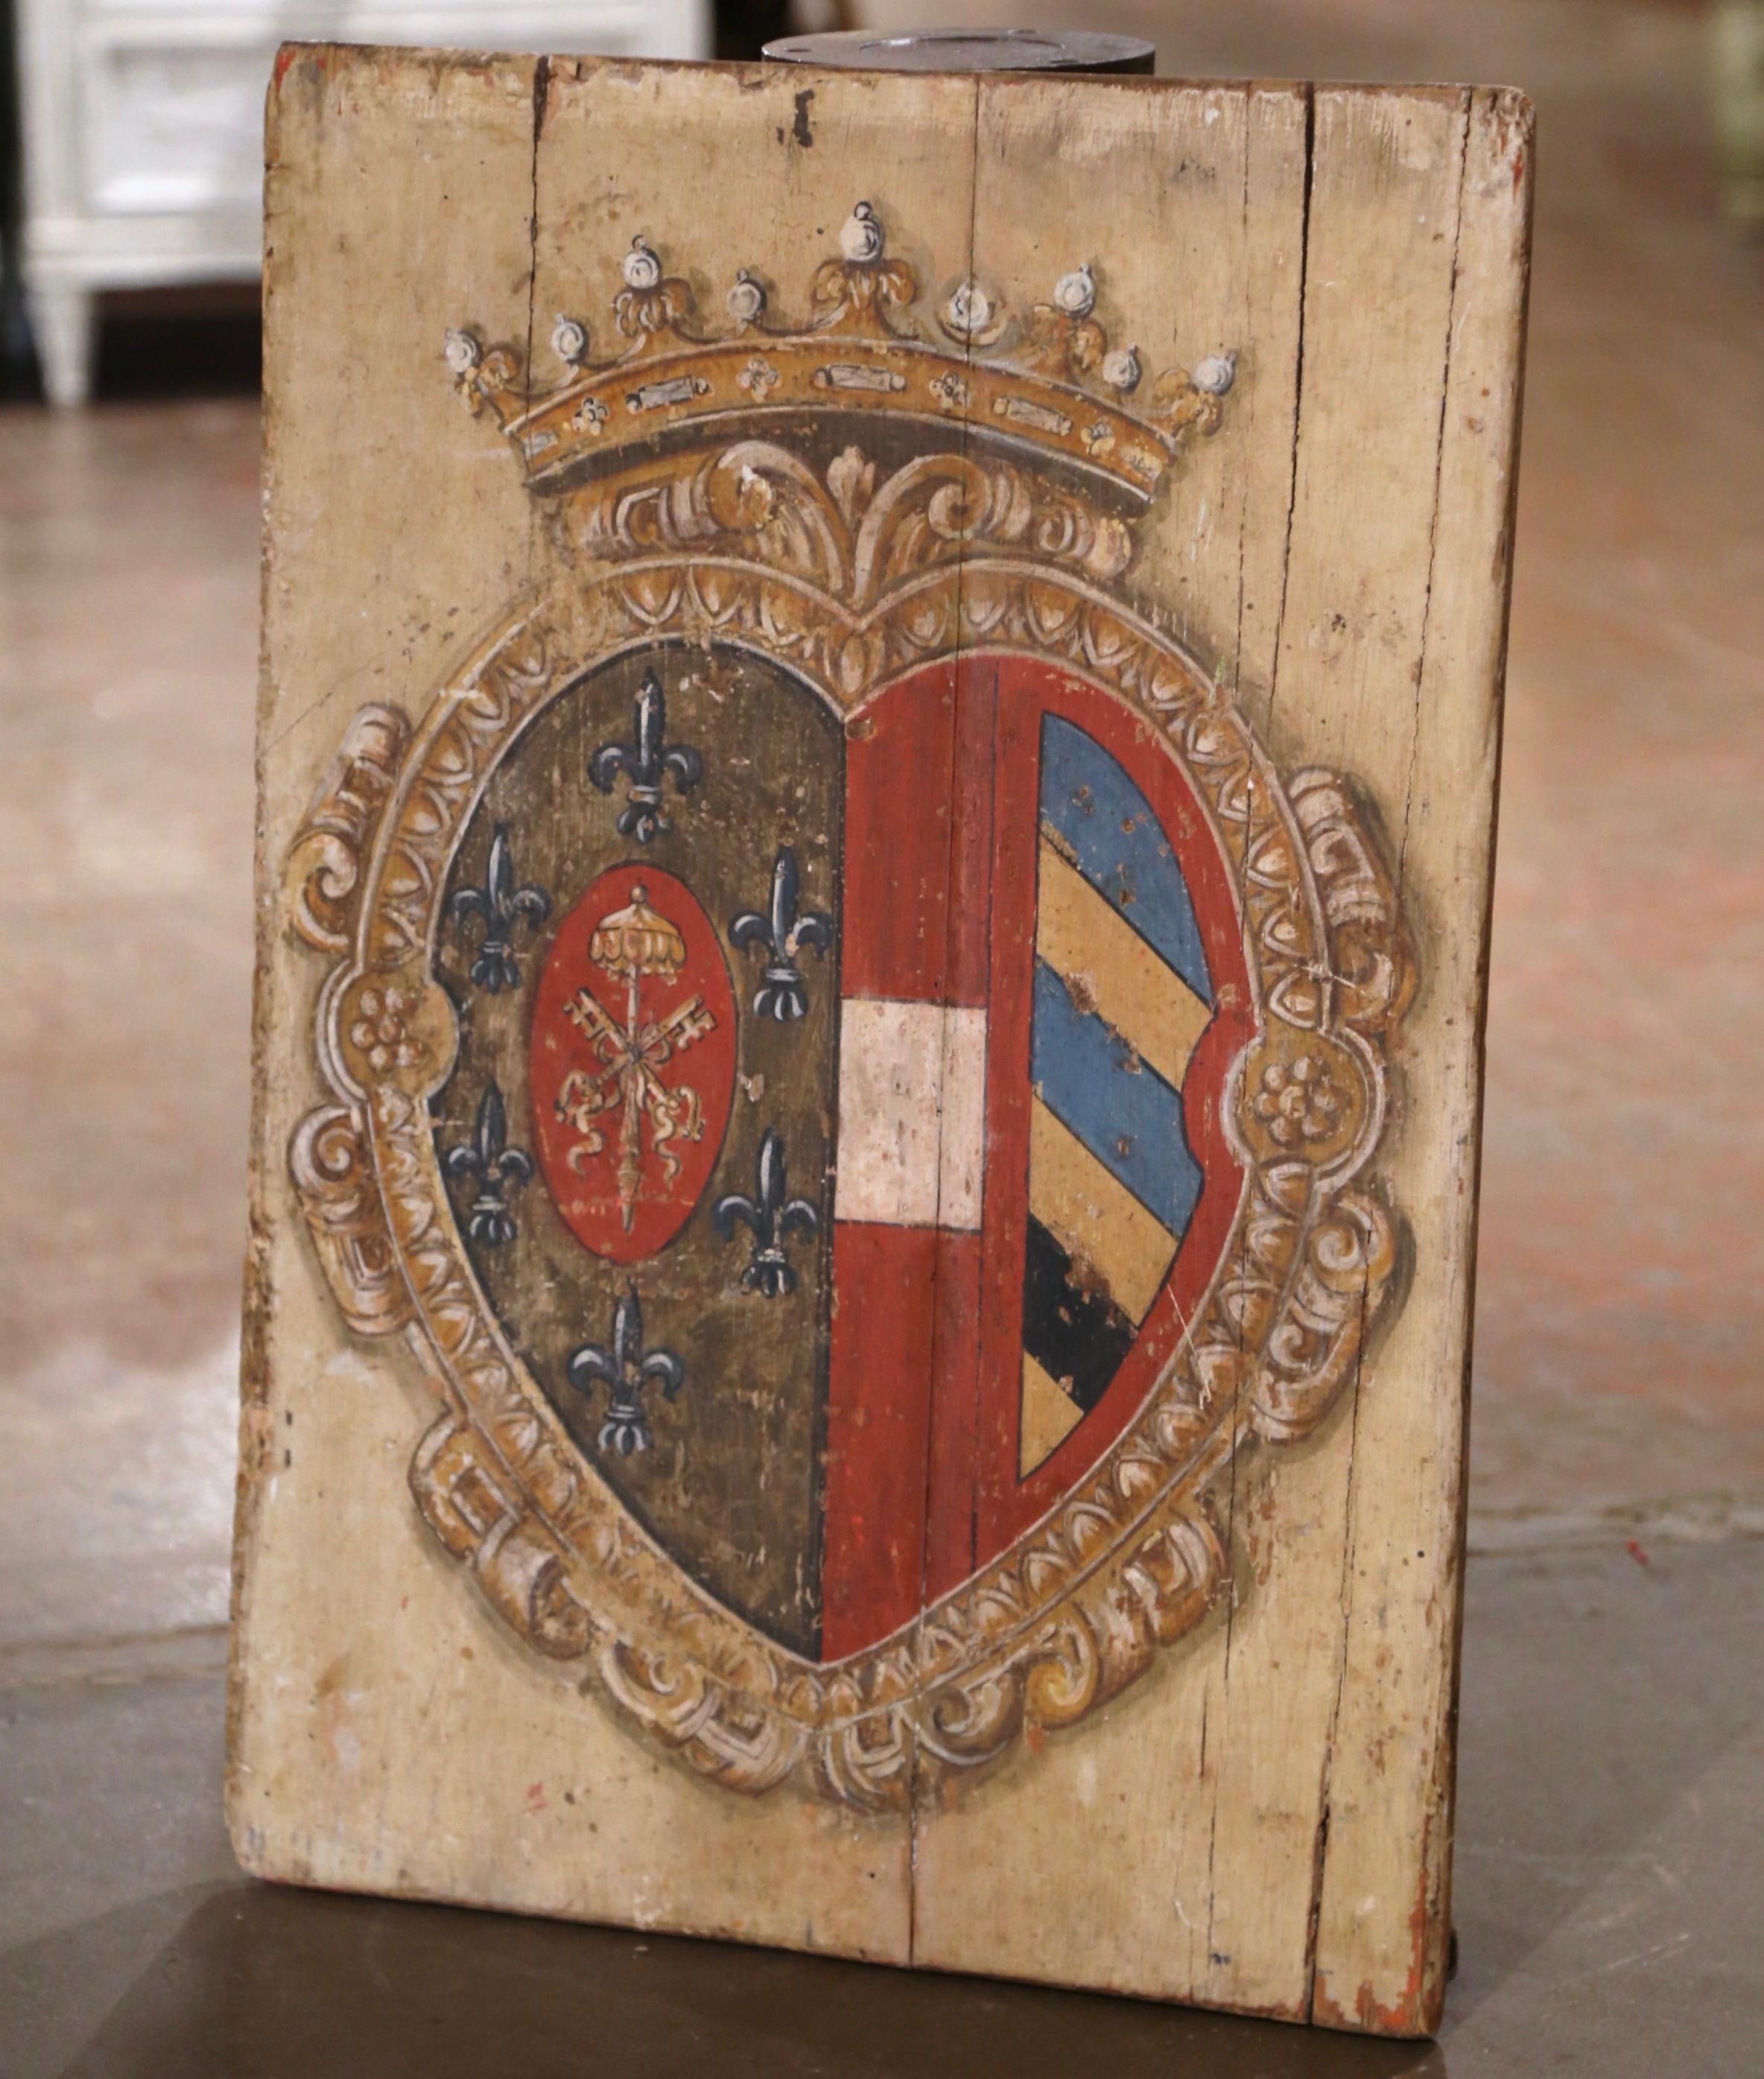 Embellish your wall with this colorful antique shield to bring rustic, old-world charm to a den, office or game room. Hand-carved in France, circa 1870, the crest features a hand painted central coat of arms shaped as a heart, and decorated with